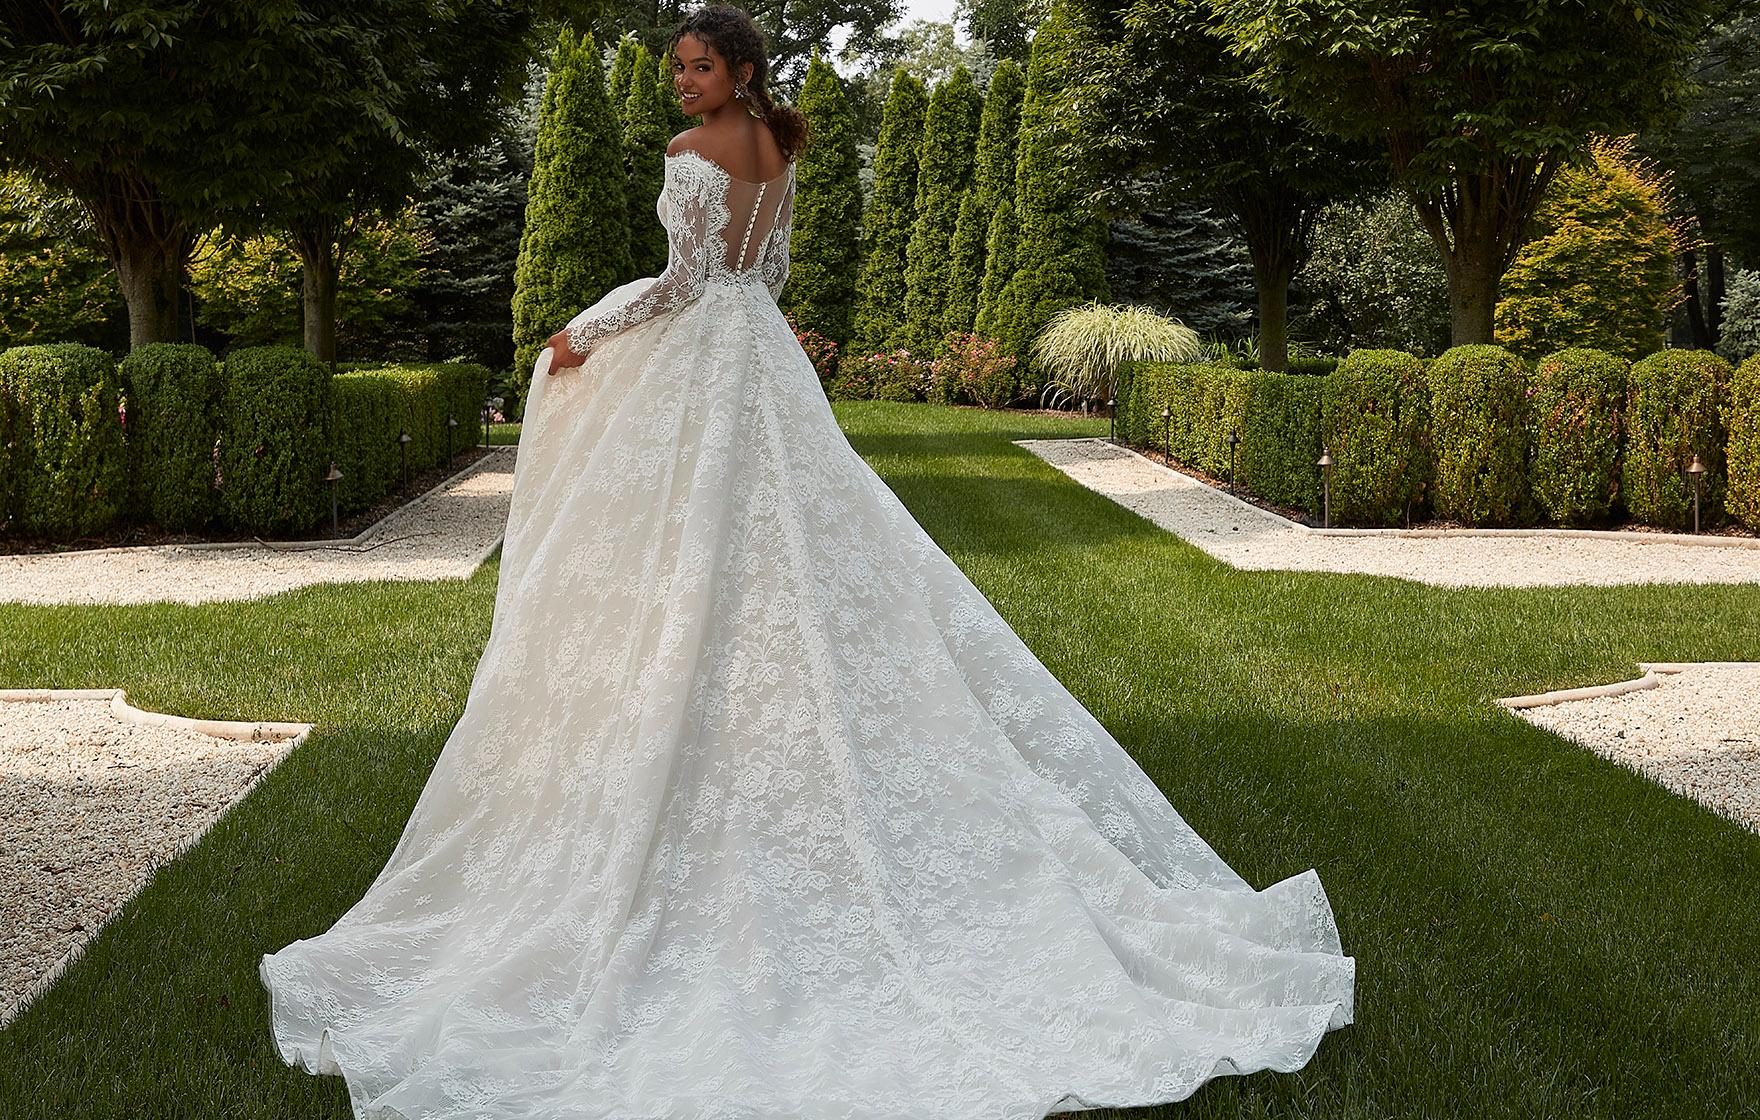 How long does it typically take to find the perfect wedding dress